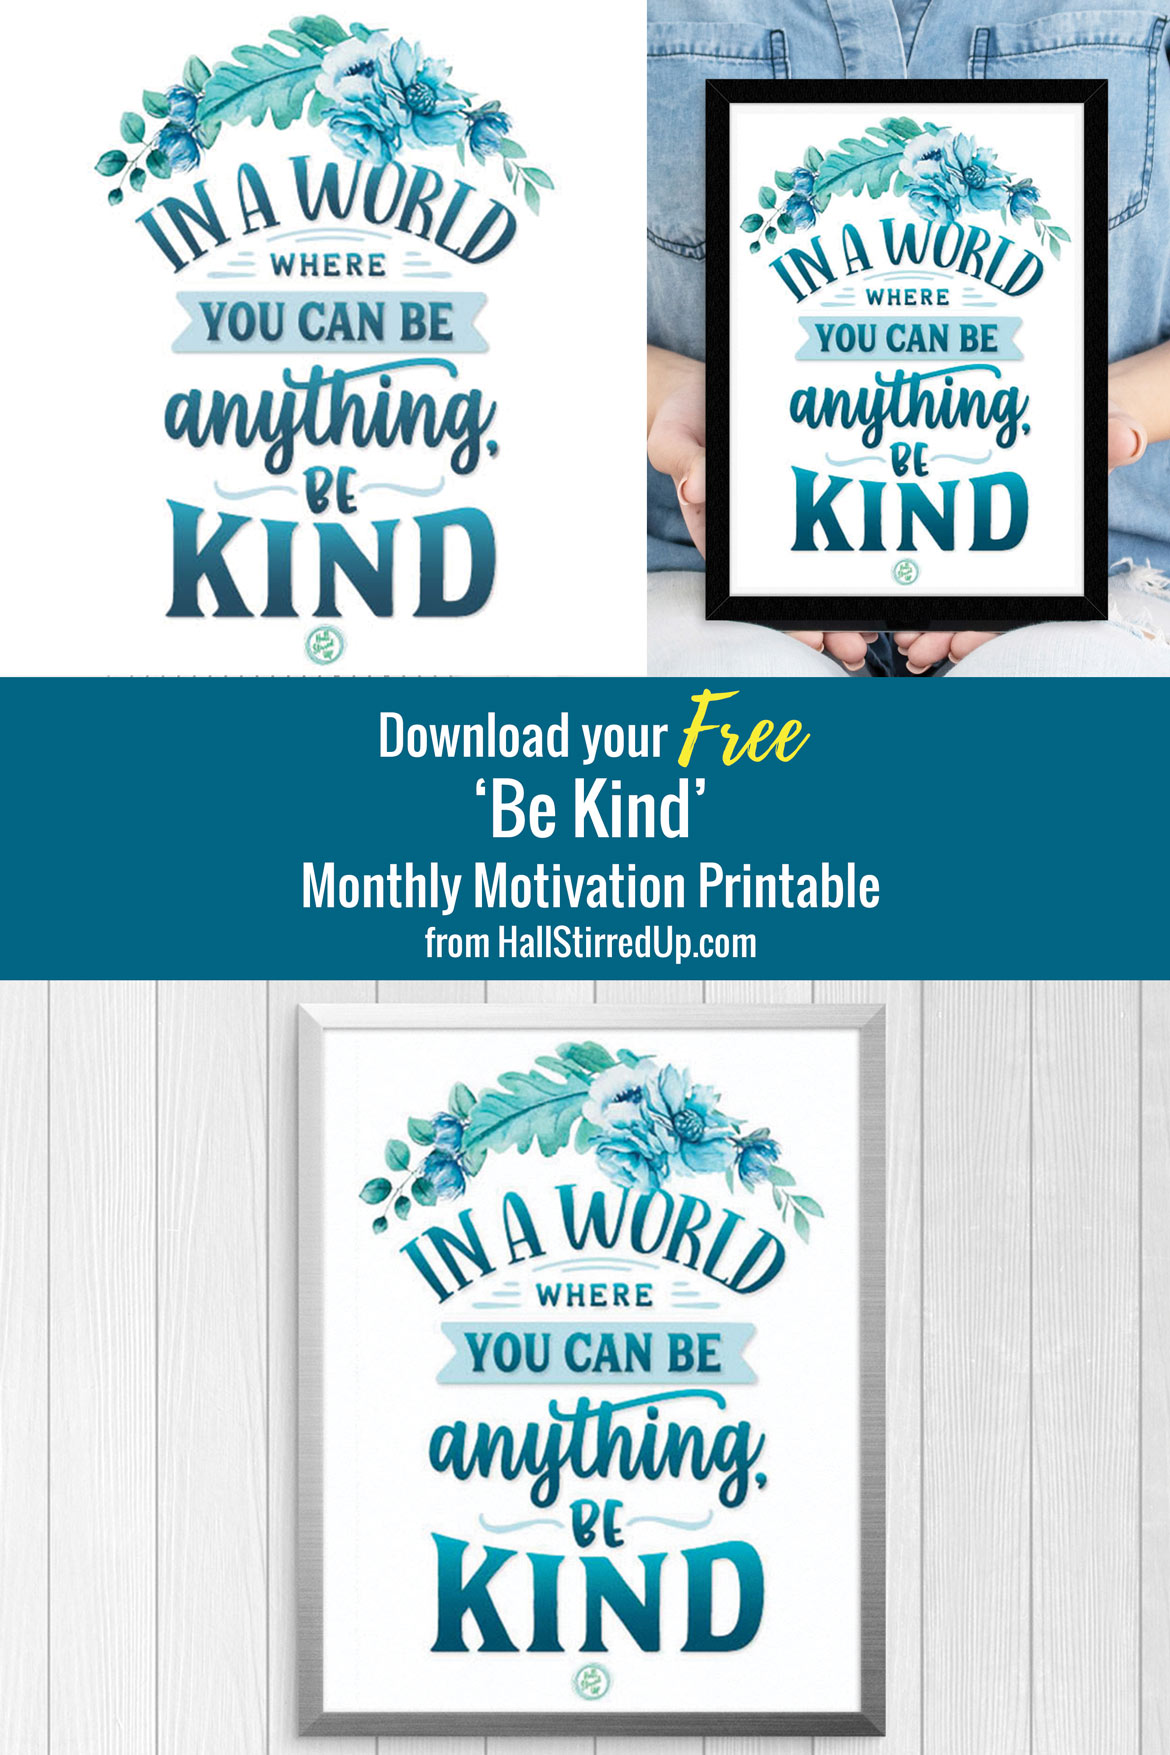 download your free be kind printable